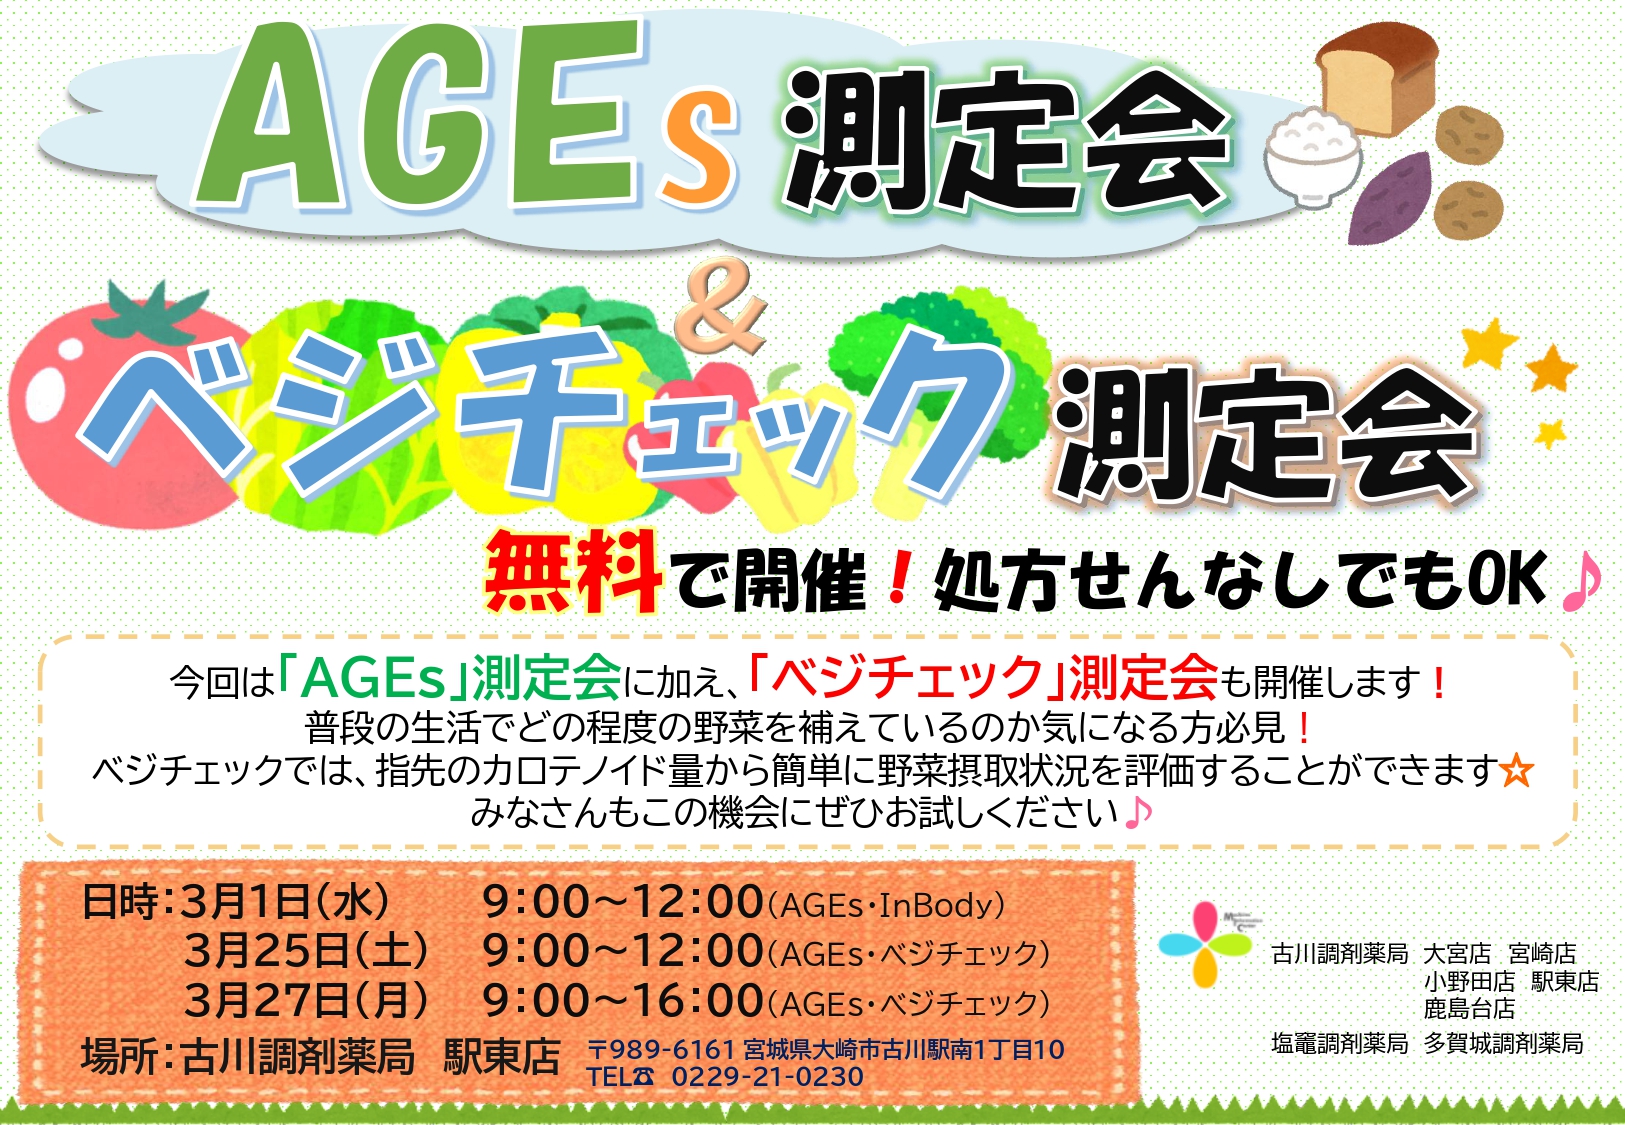 AGEs測定会＆べジチェック測定会　告知用紙(2023.3月 駅東)_page-0001